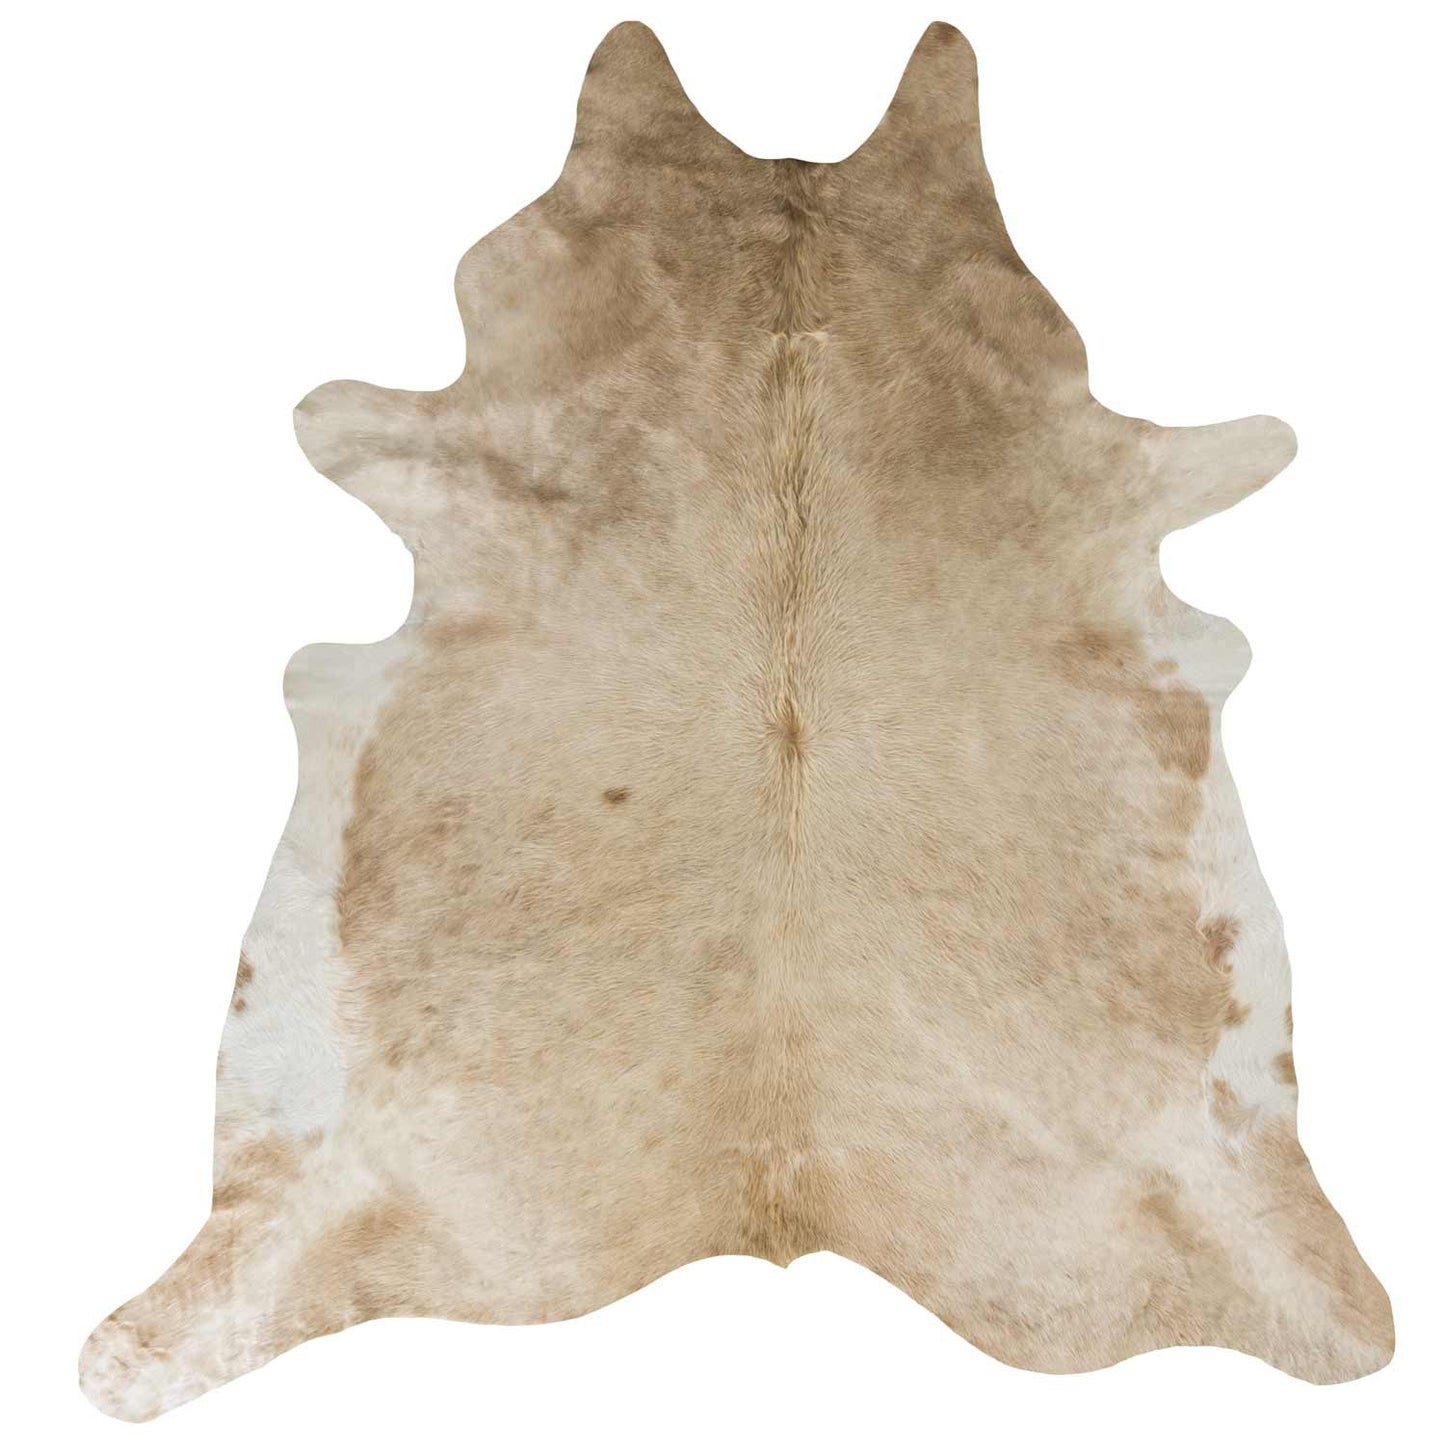 Light Champagne Cowhide Rug - Rodeo Cowhide Rugs6x6